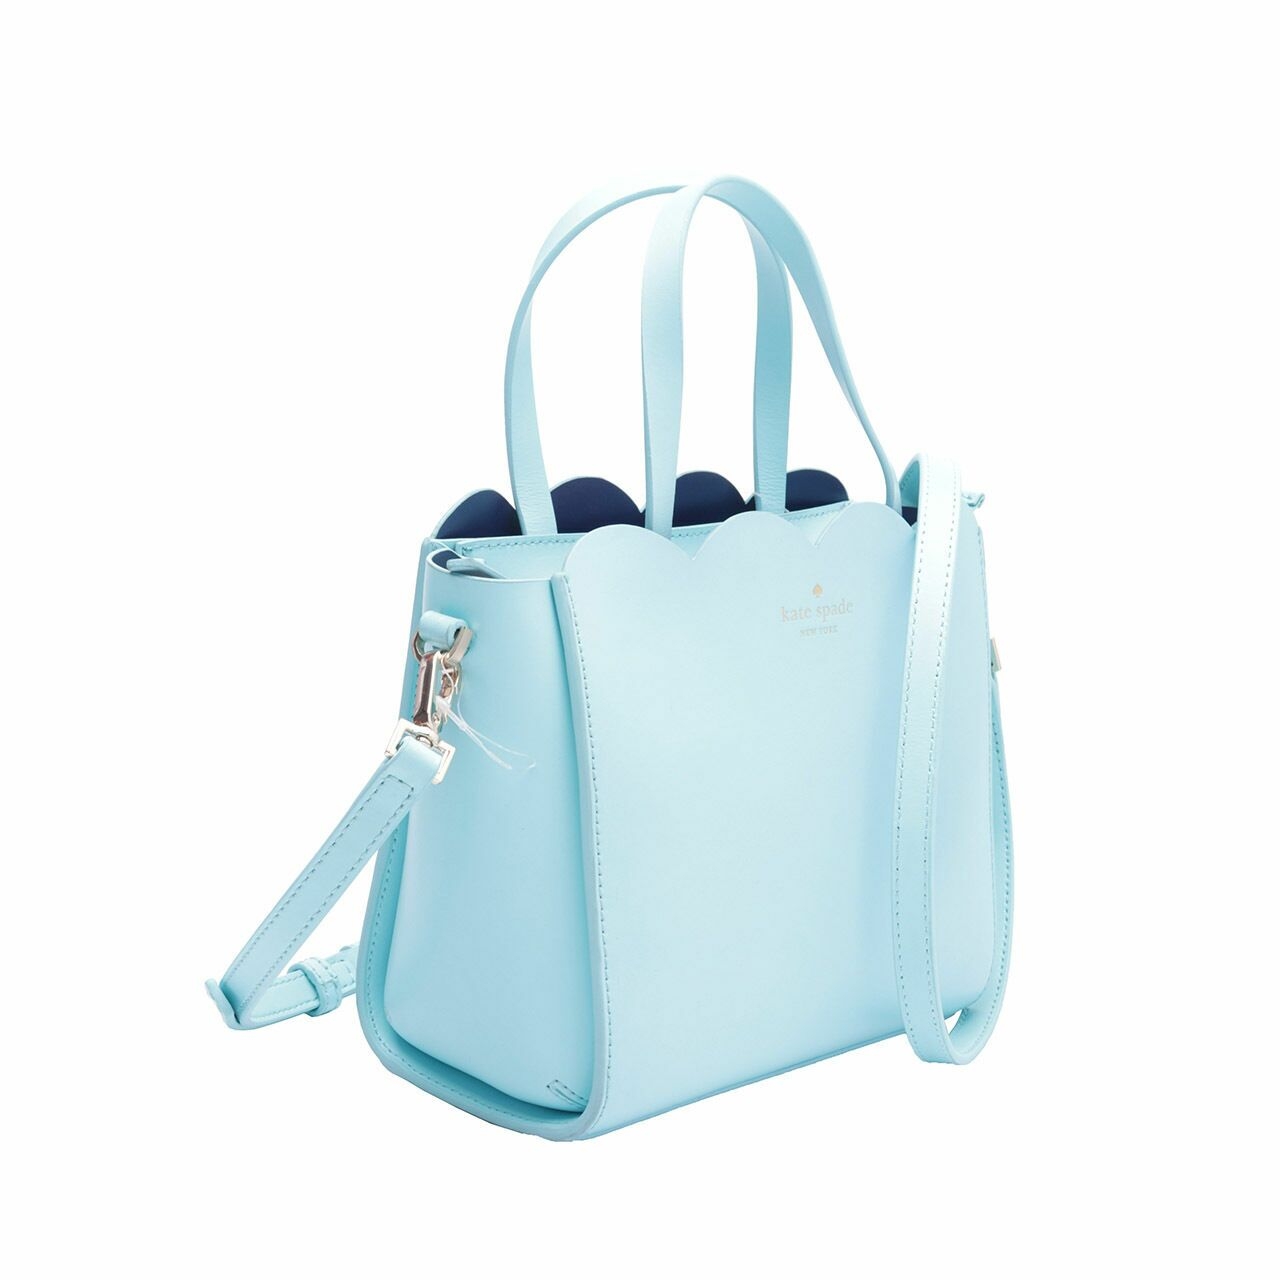 Kate Spade New York Blue Lily Avenue Scalloped Satchel